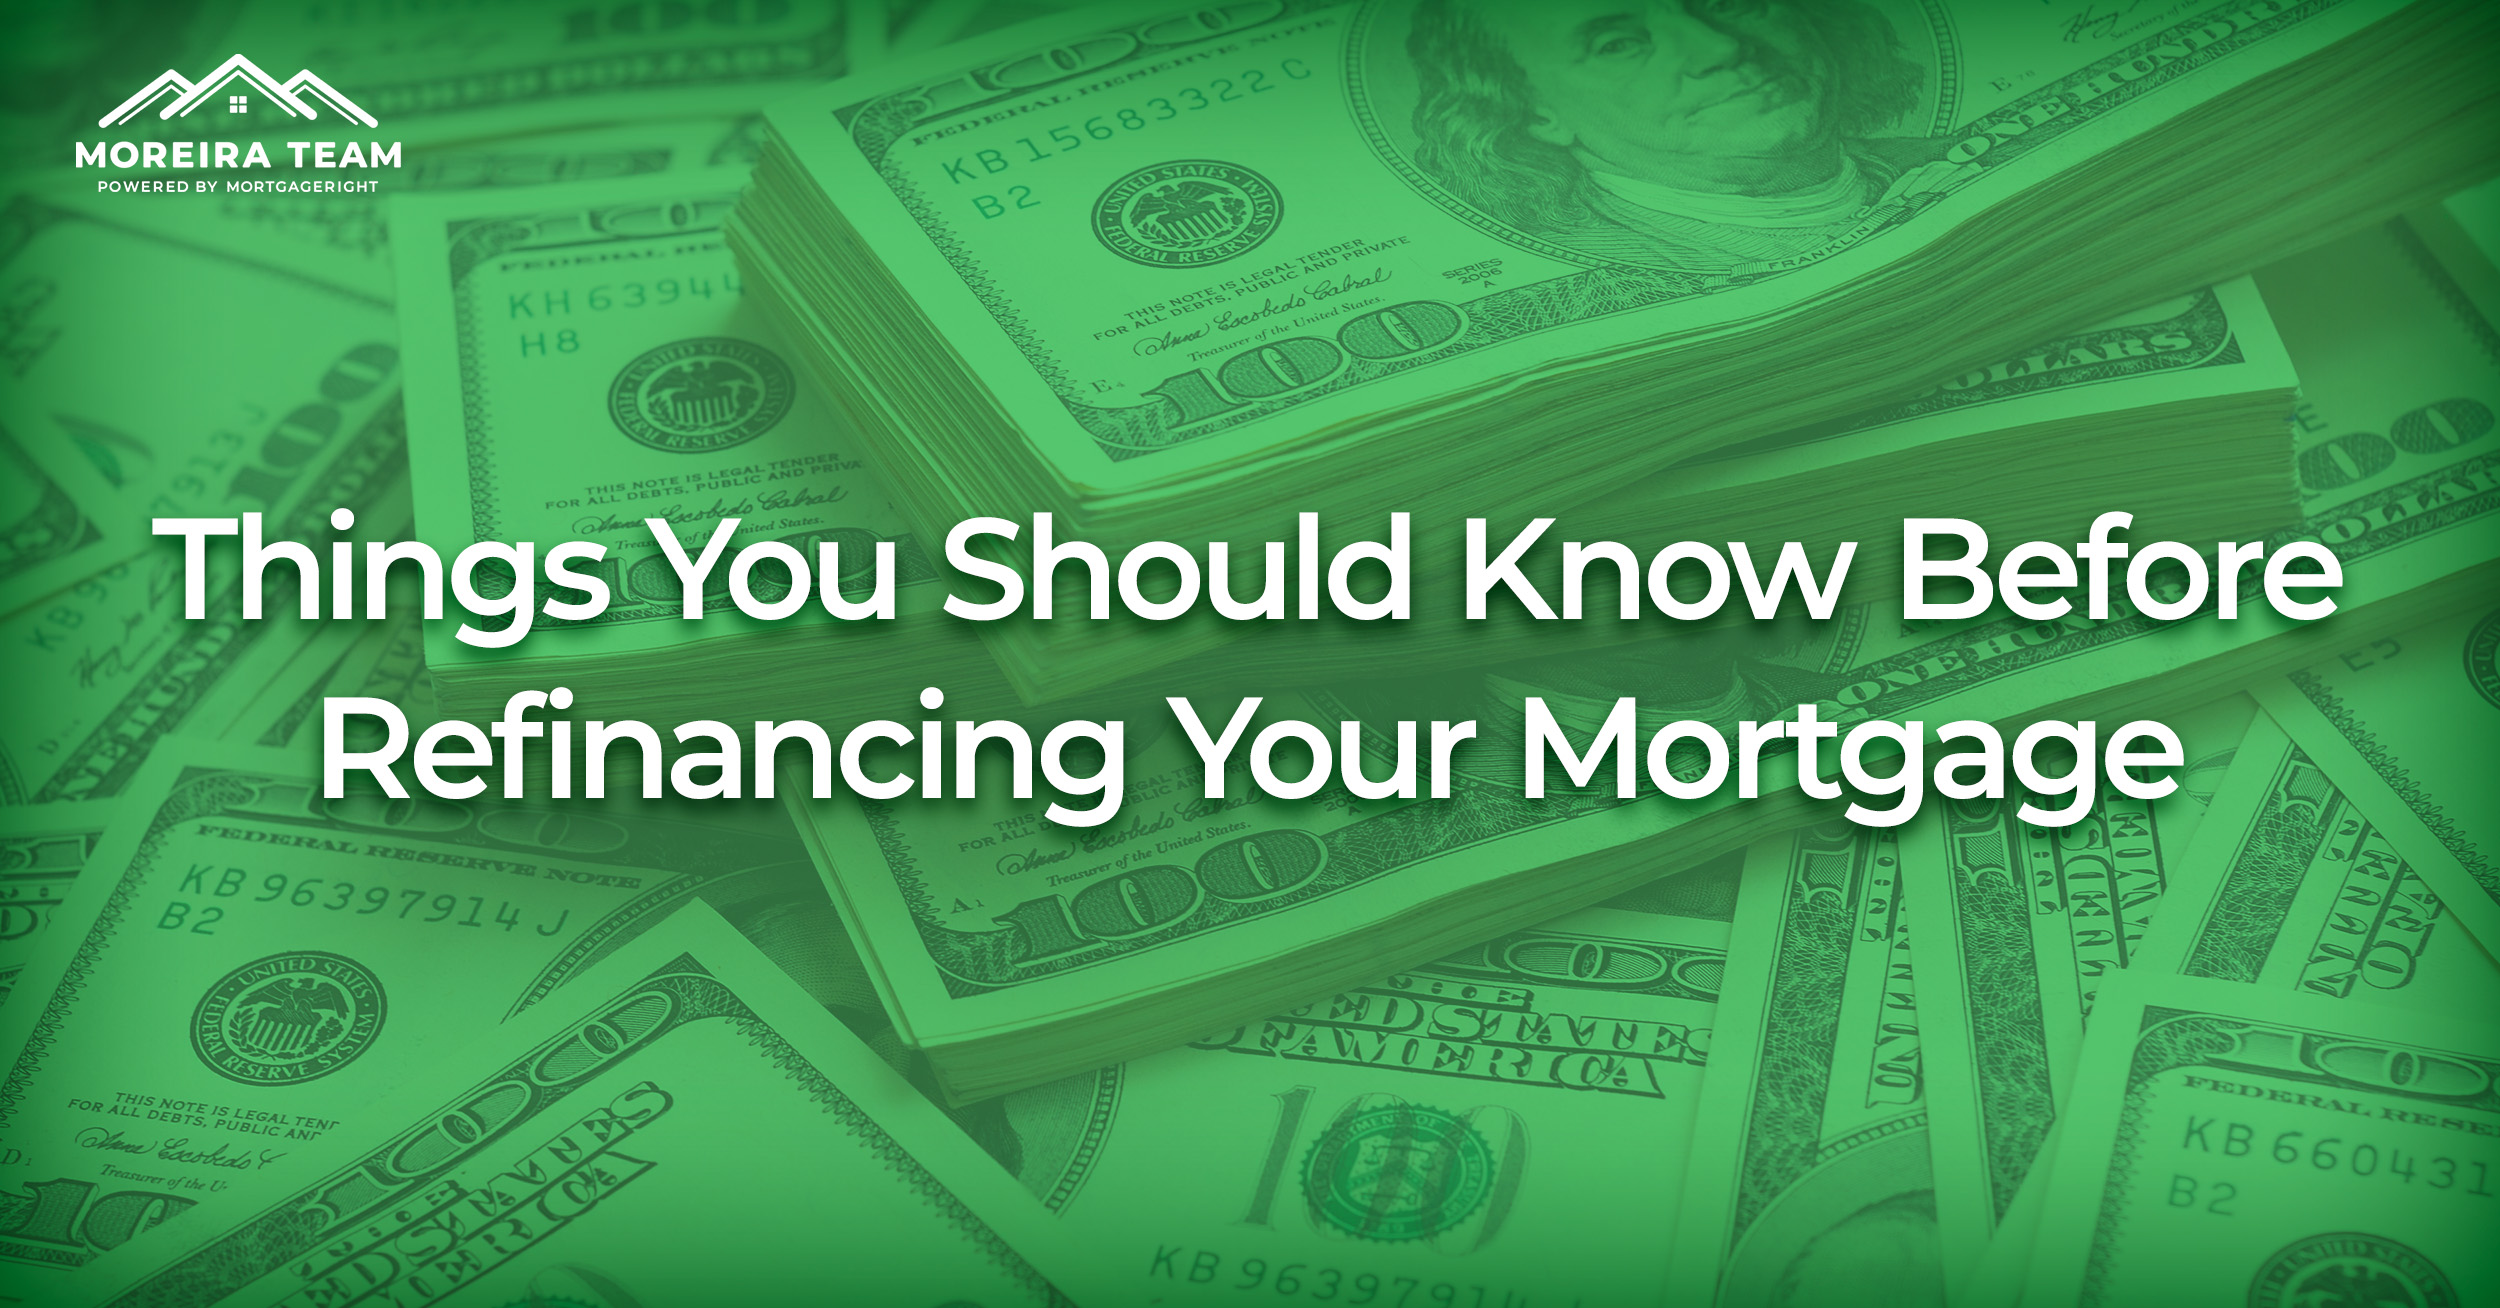 Things You Should Know Before Refinancing Your Mortgage